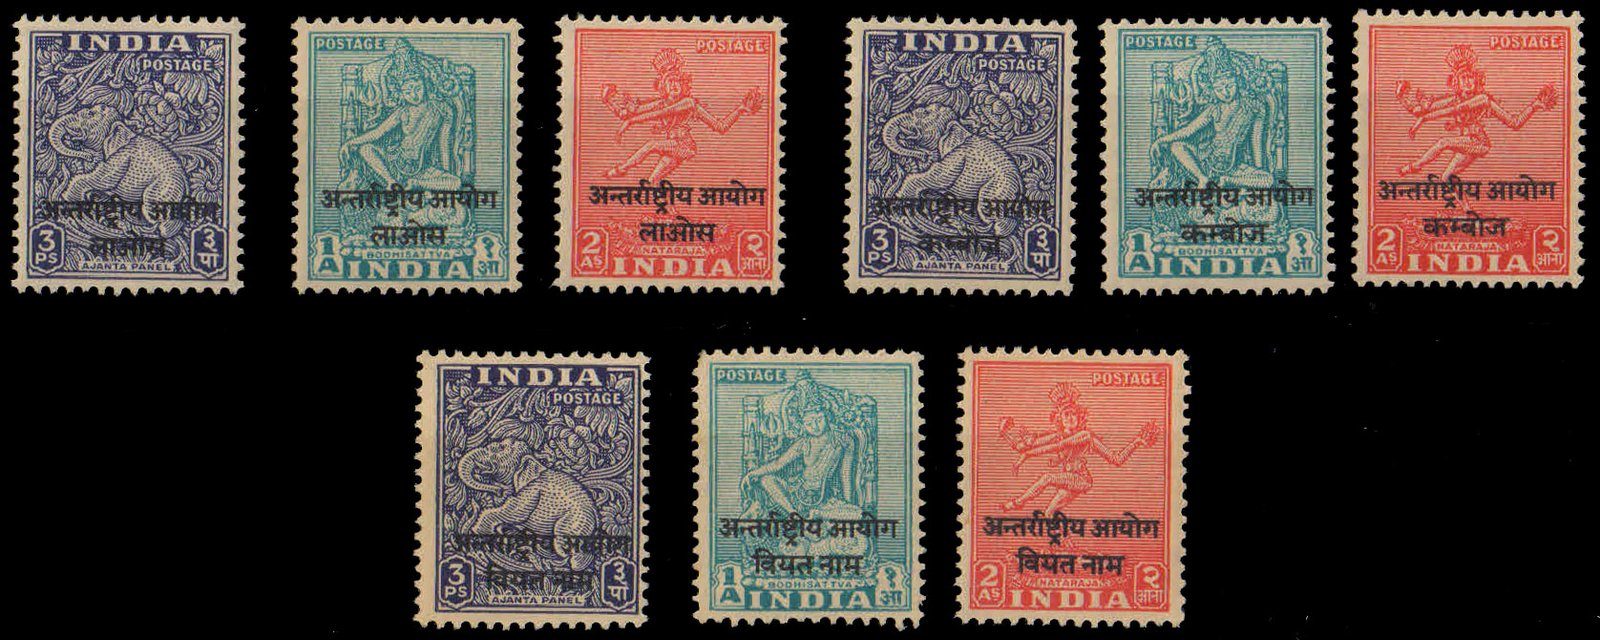 1954 Indian forces in Indio China overprinted on Archeological series short set of 9 stamps, Cat £ 9, Mint Never Hinged 